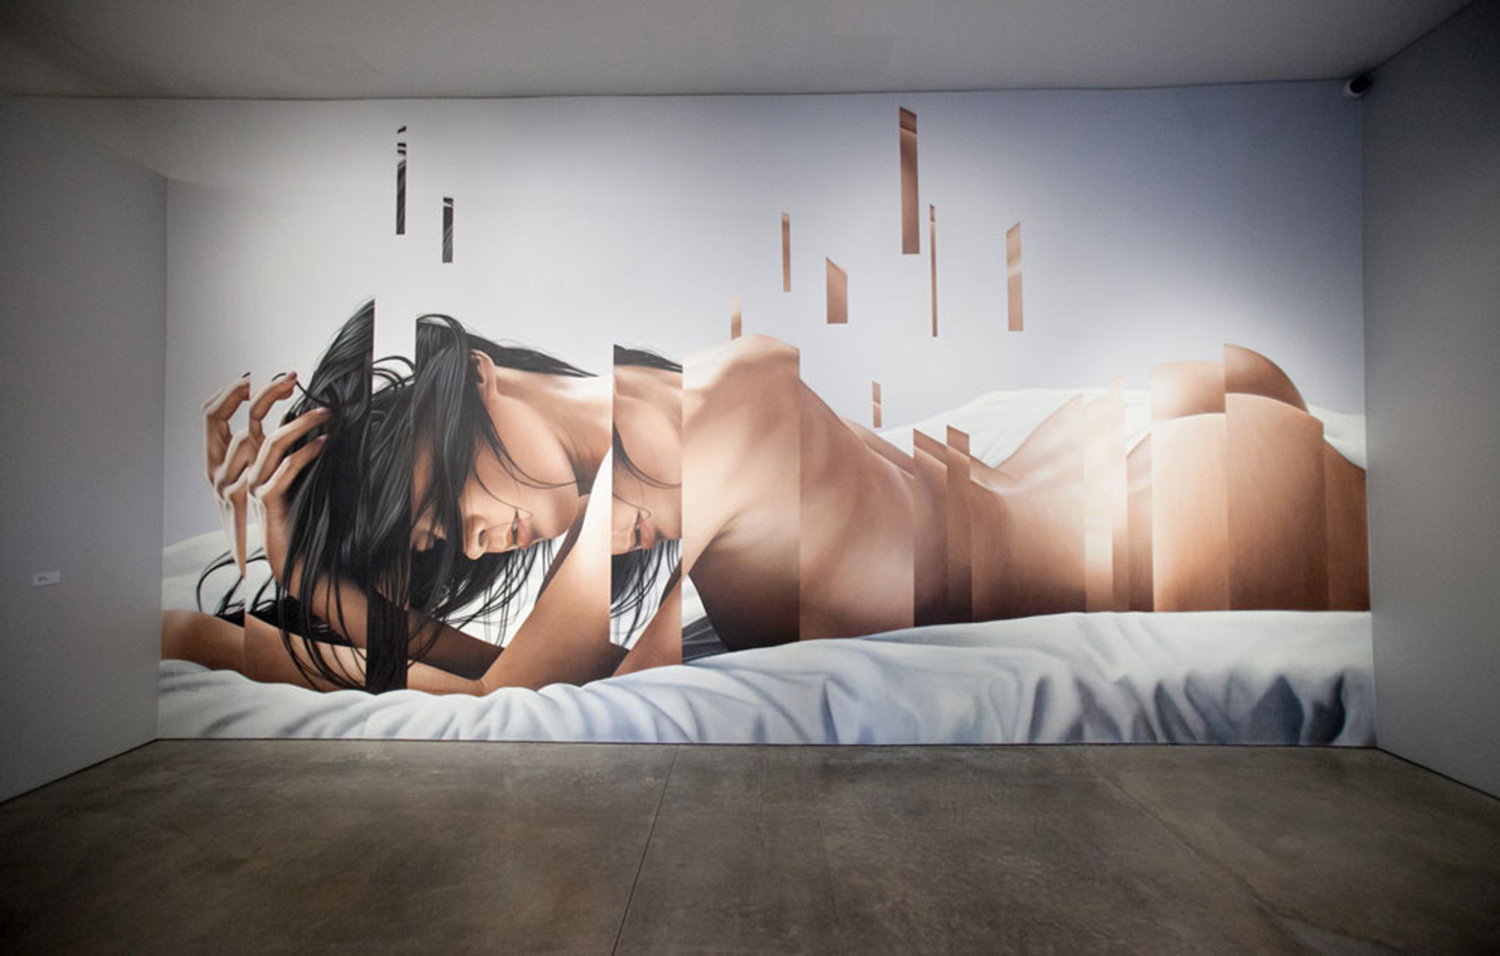 mural of a woman in segments by james bullough